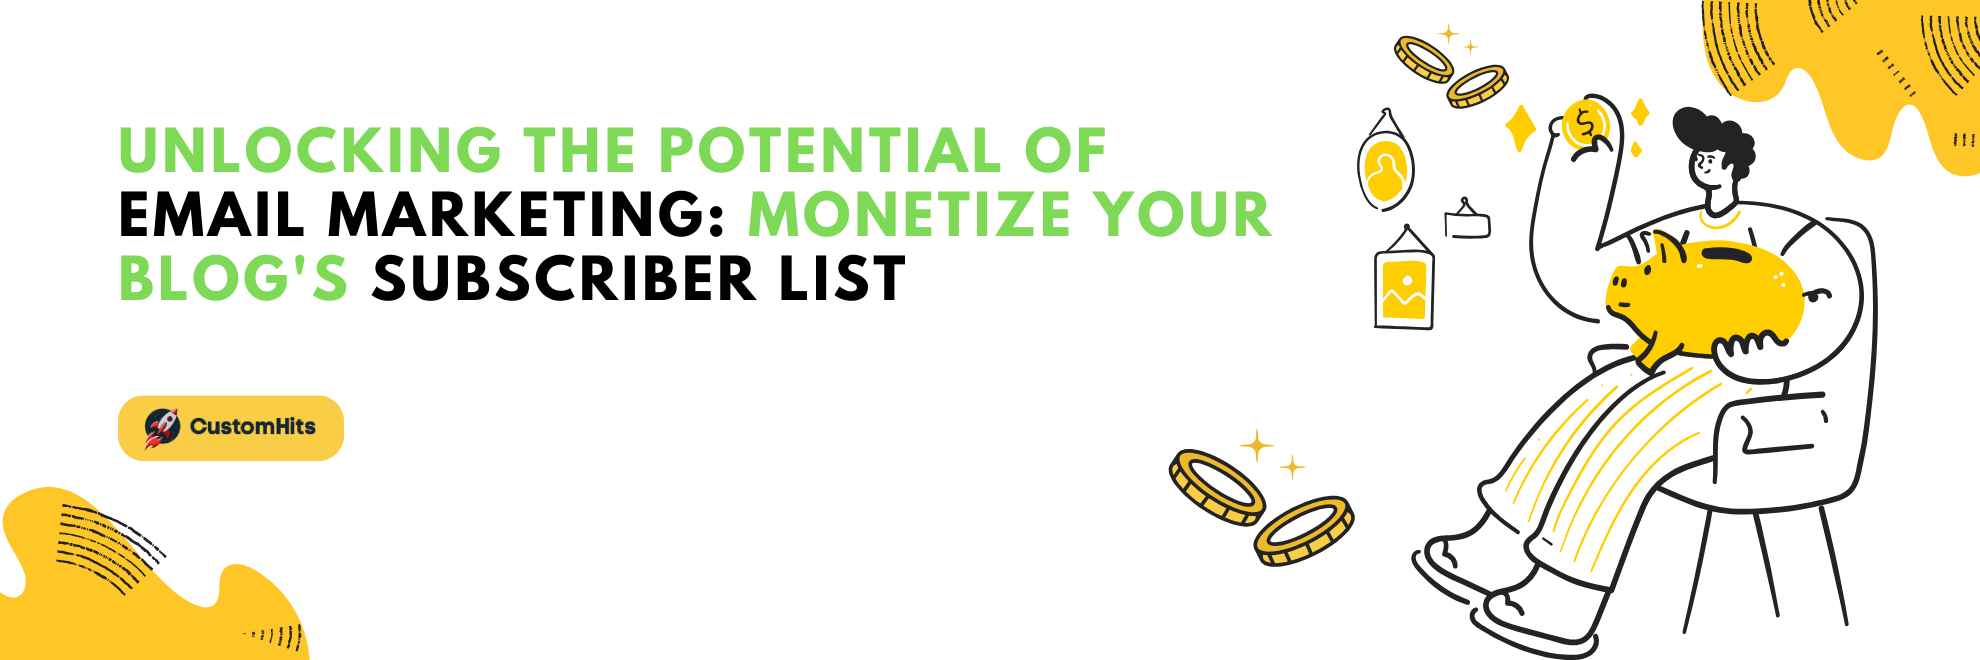 Unlocking the Potential of Email Marketing: Monetize Your Blog's Subscriber List